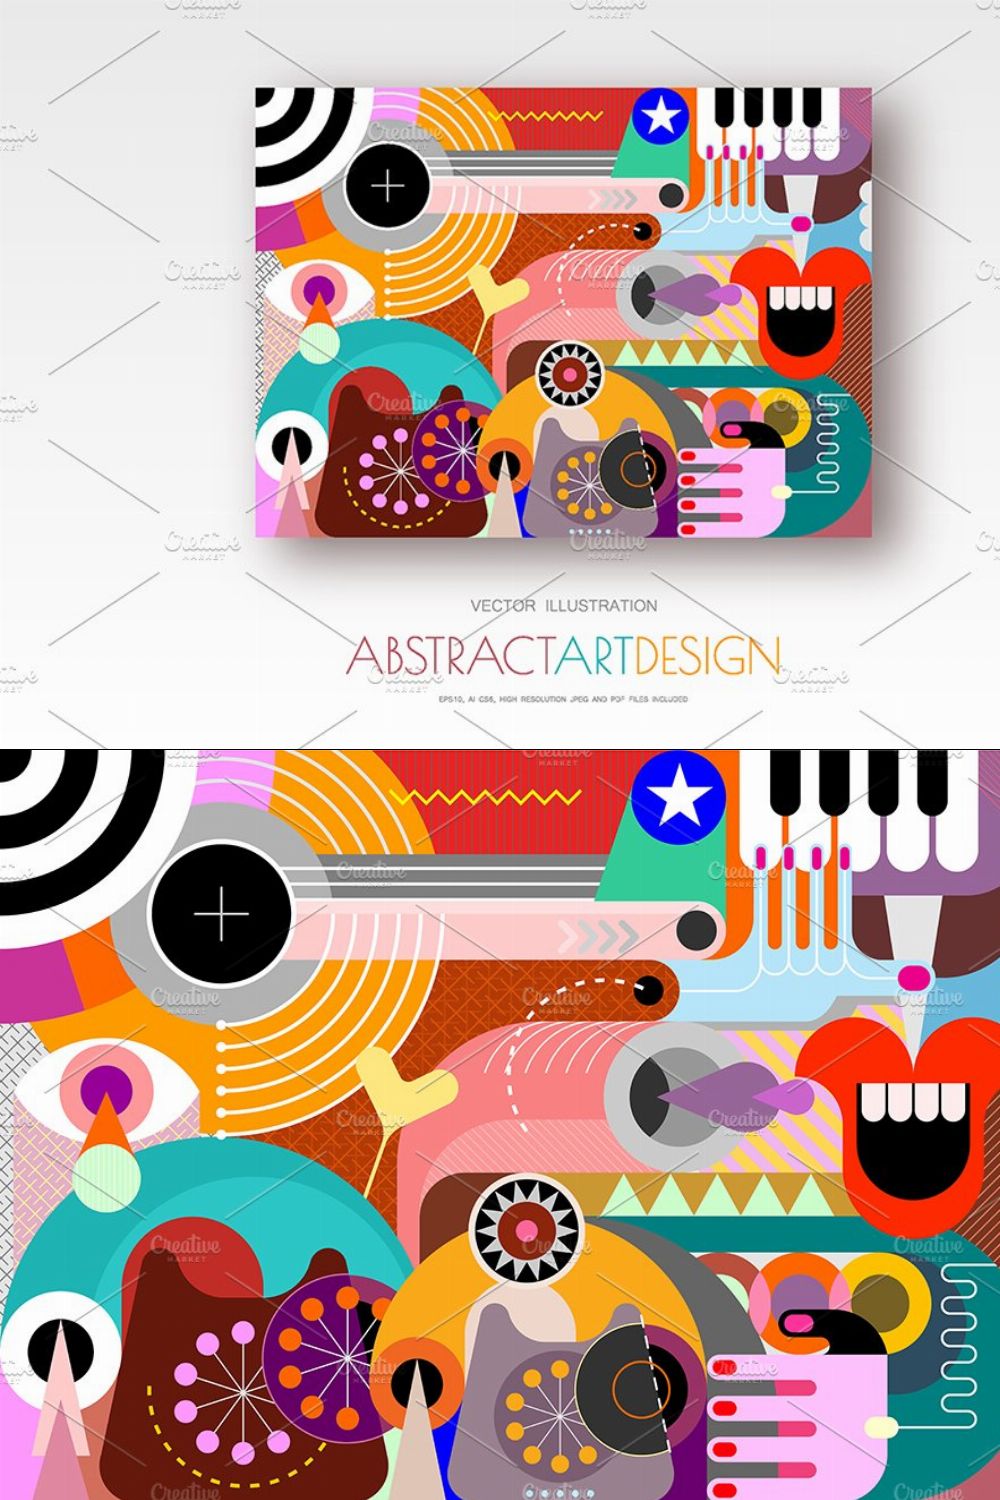 Abstract Art vector illustration pinterest preview image.